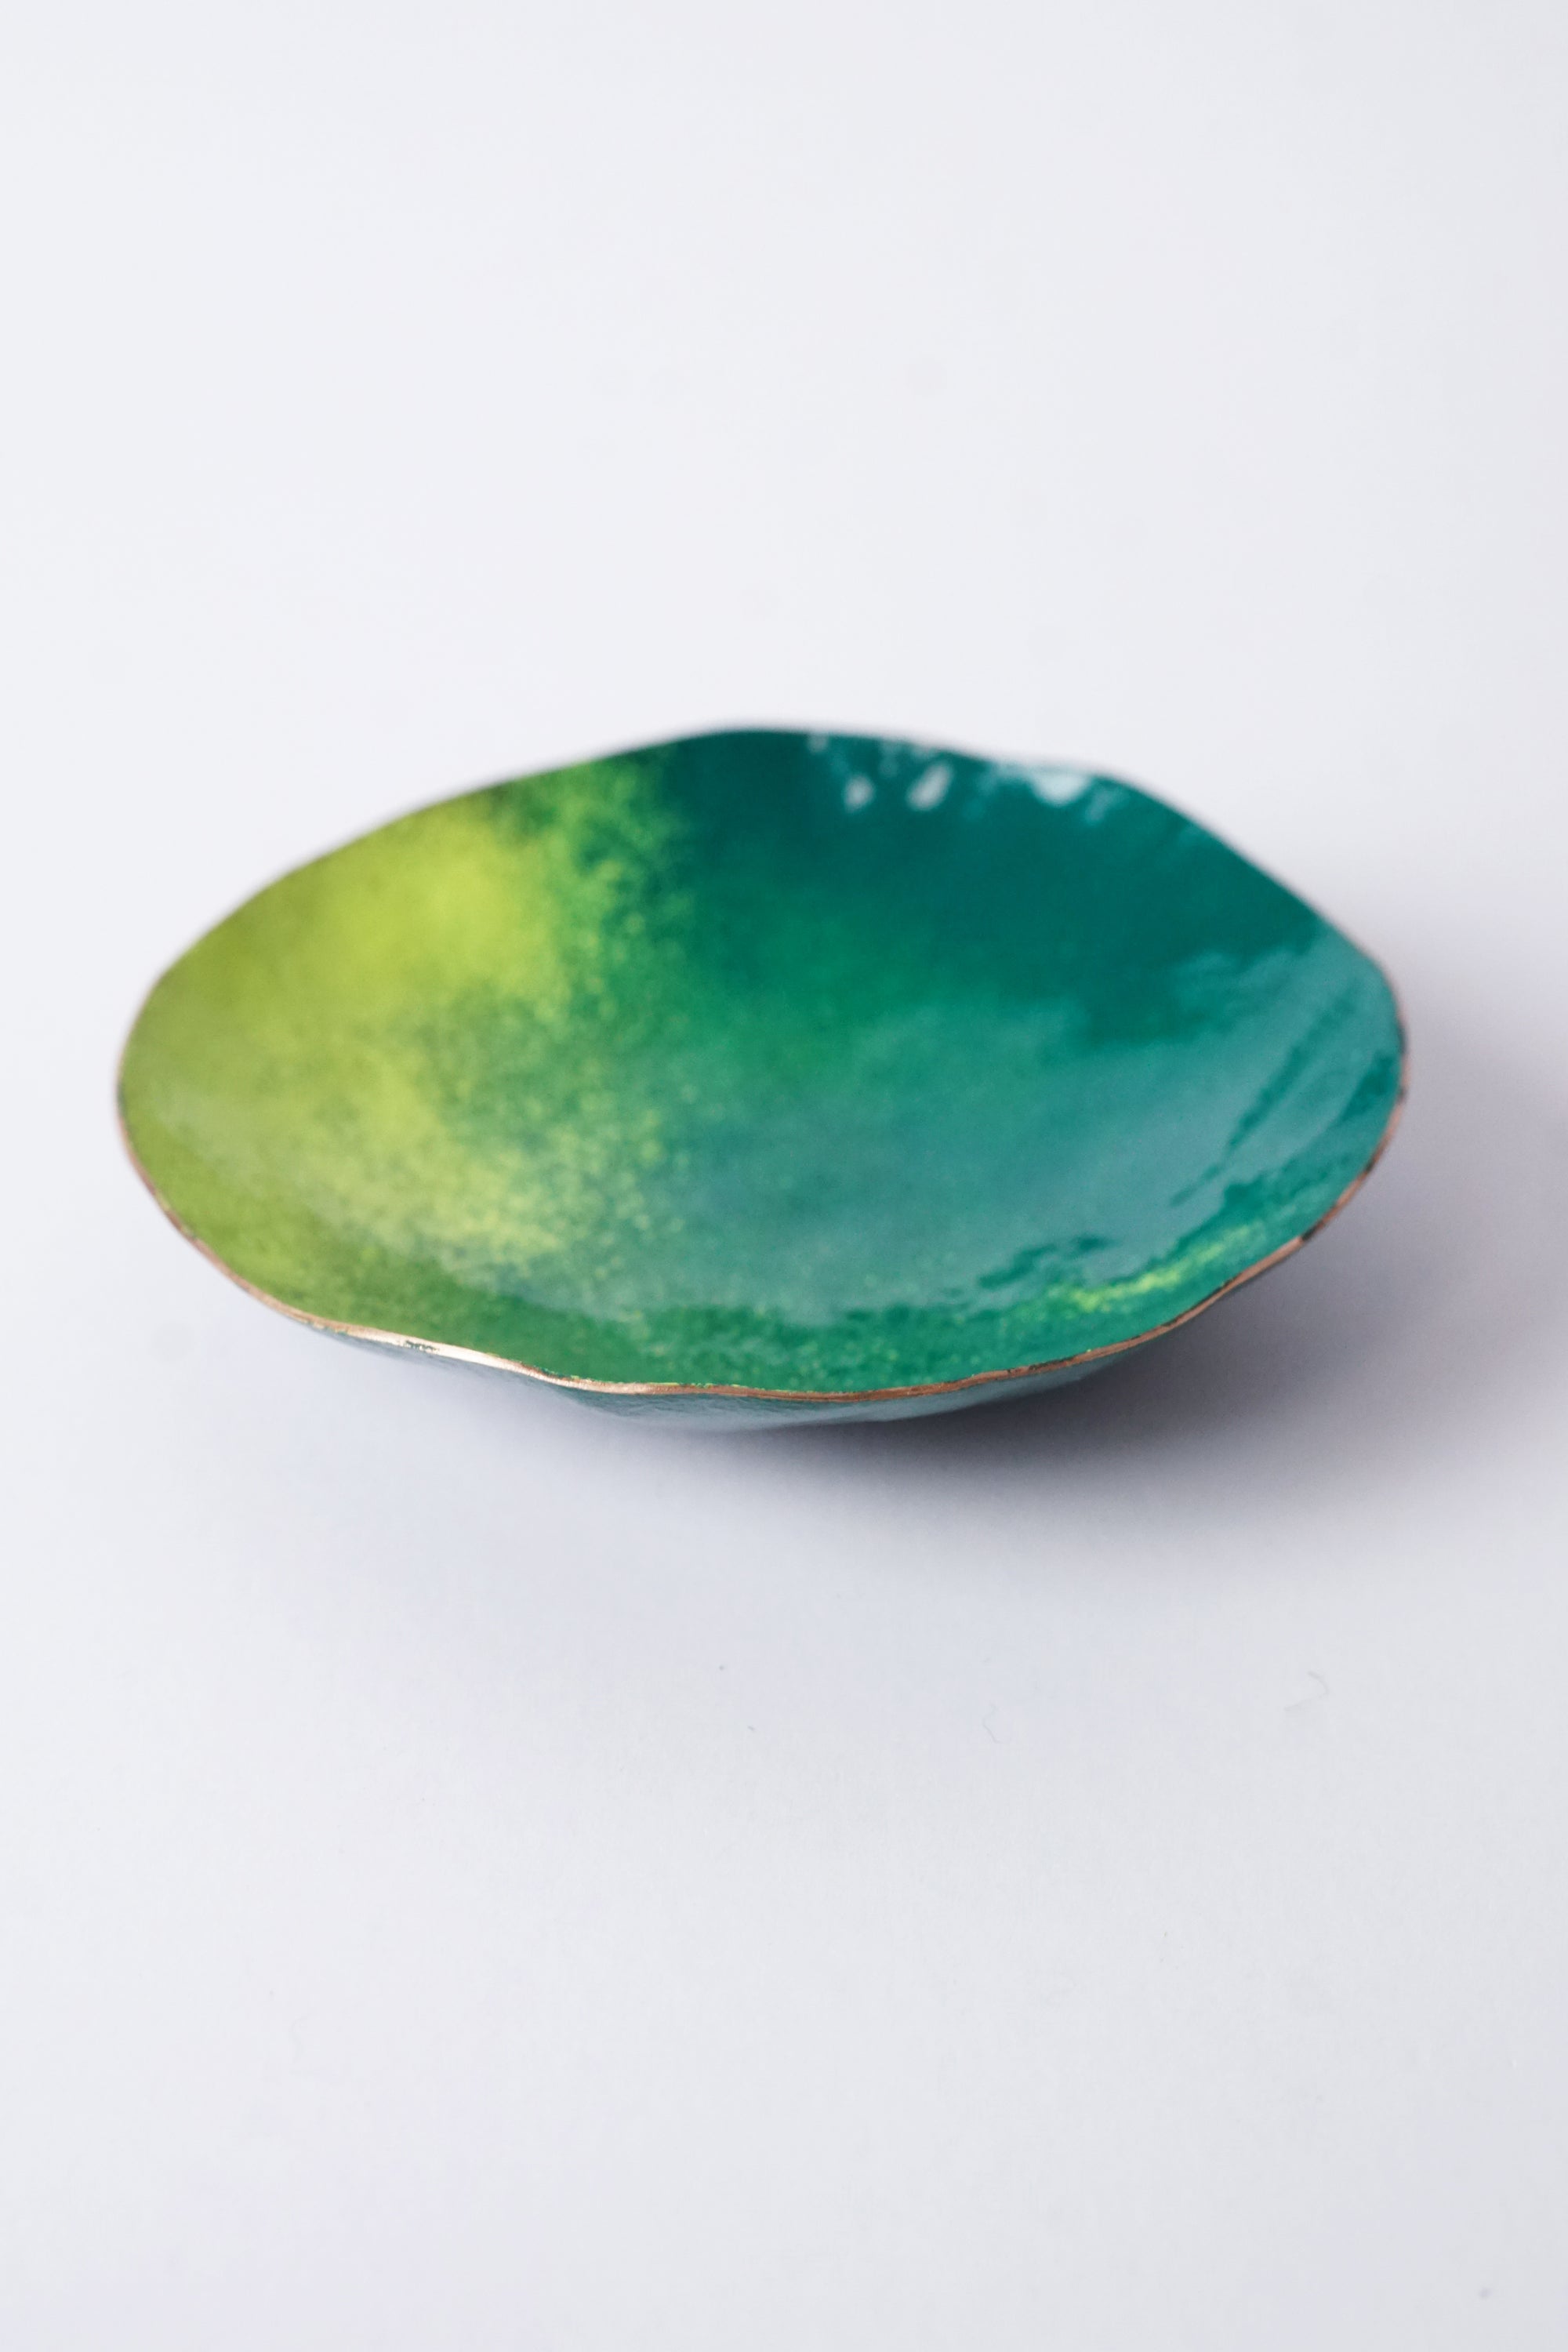 Little Copper Dish in Green and Yellow